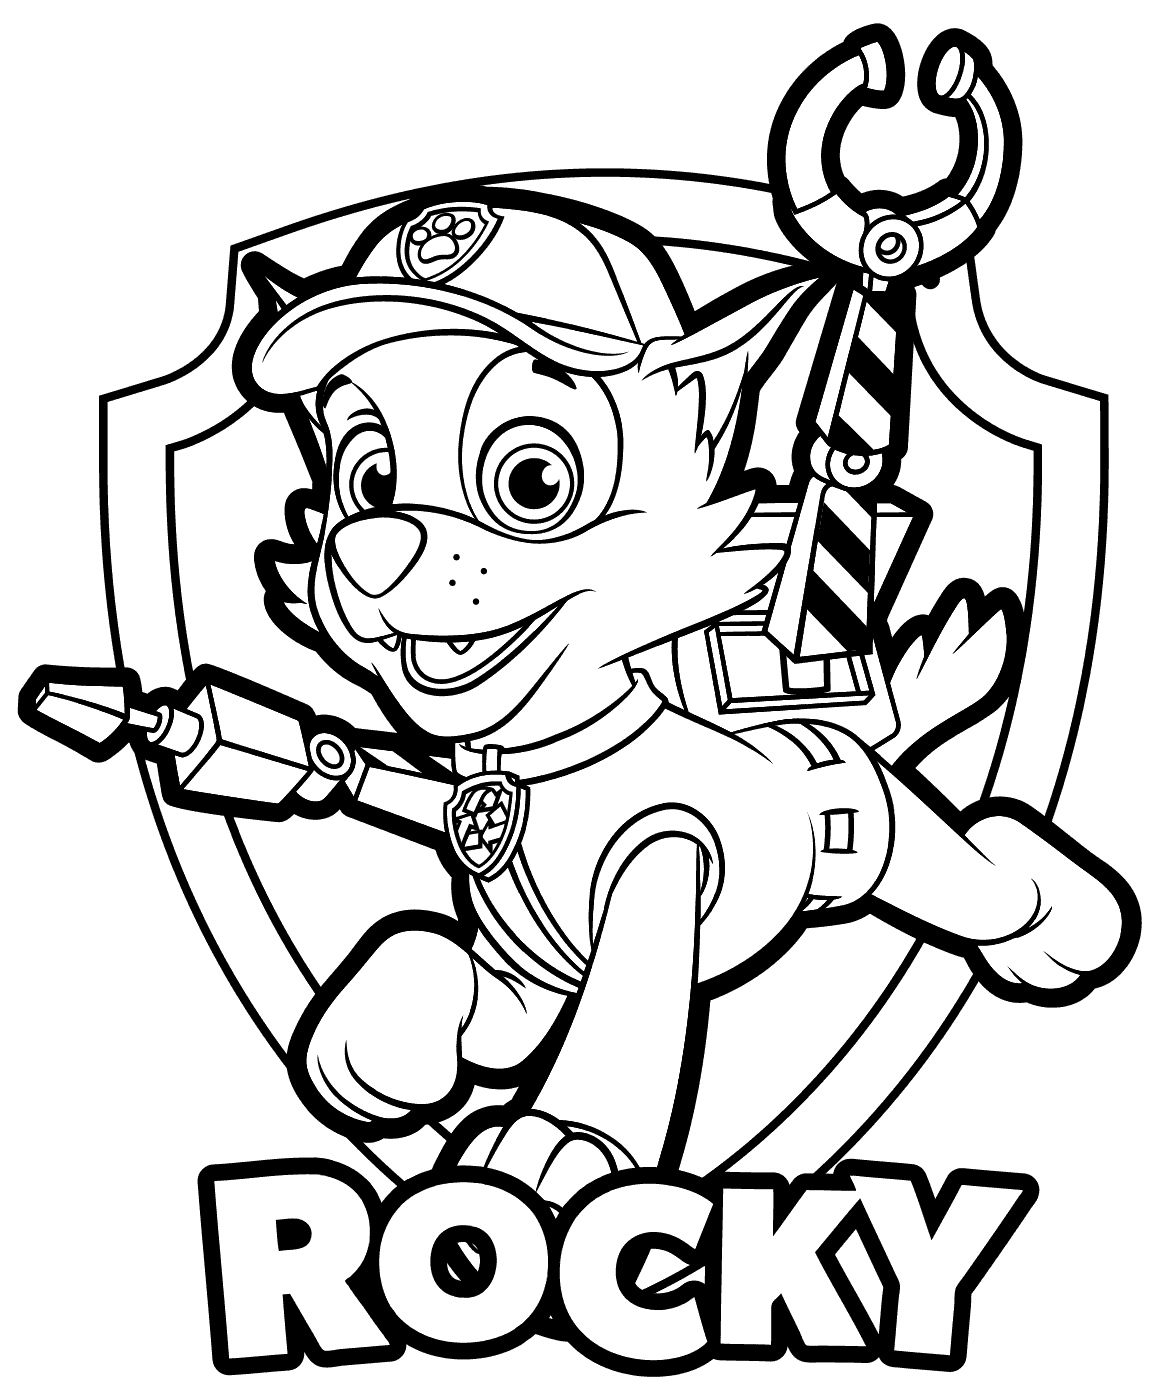 Rocky - Paw Patrol Coloring Pages